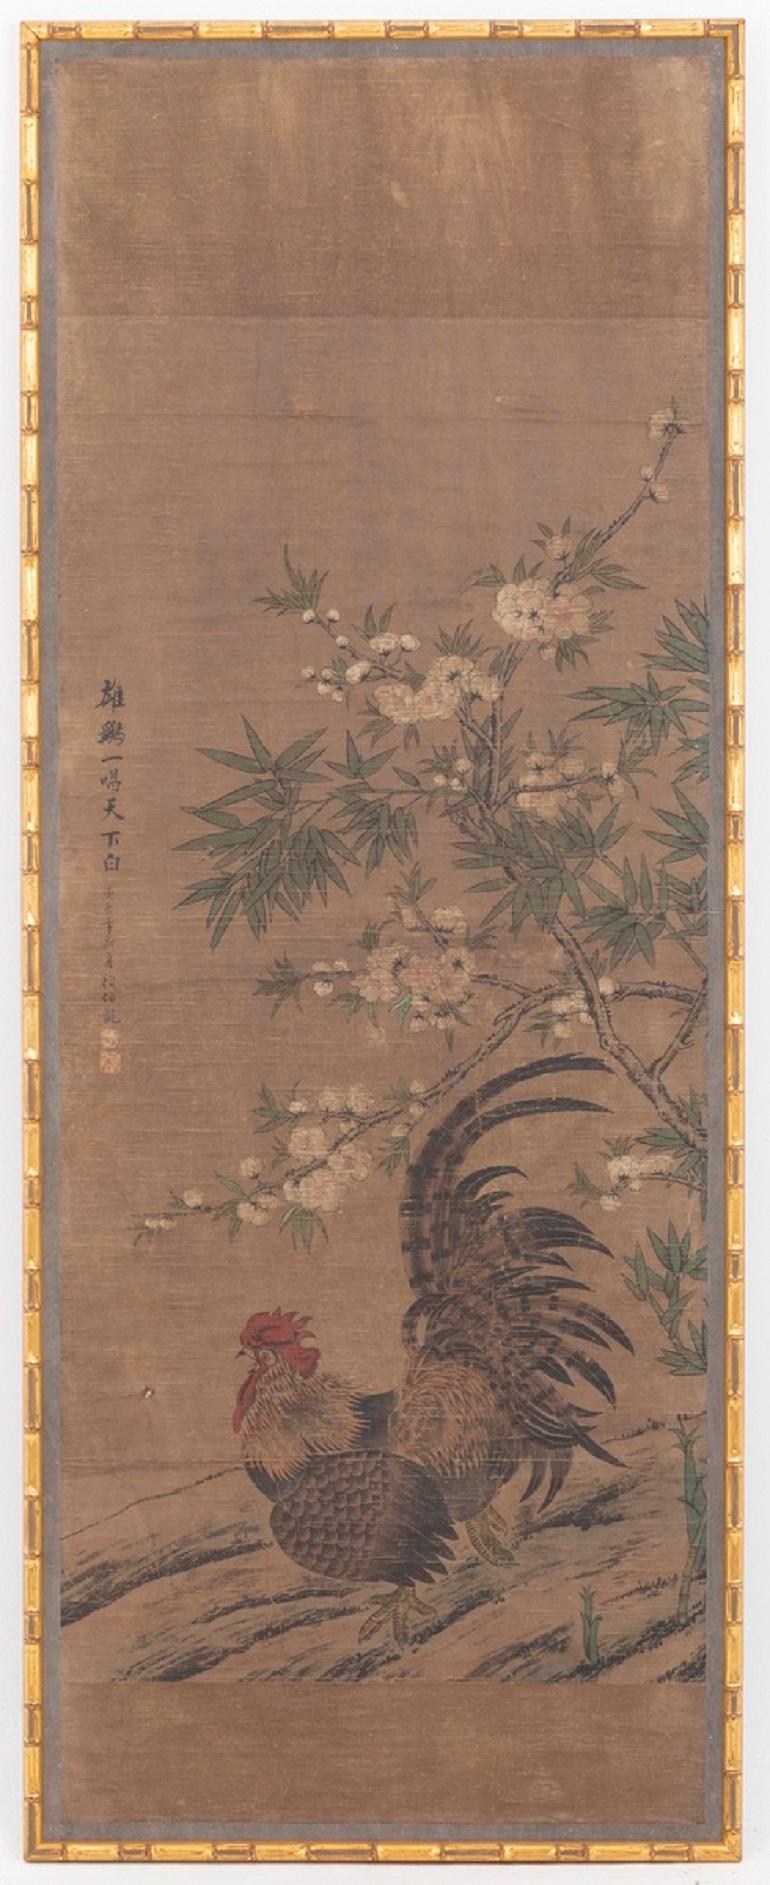 Three panels in rice paper with a Chinese painted decor.
A panel figure three birds on branches surrounded by yellow chrysanthemum. On the floor, three pheasants and one try to eat an insect.
A second panel figure a pheasant and a partridge on